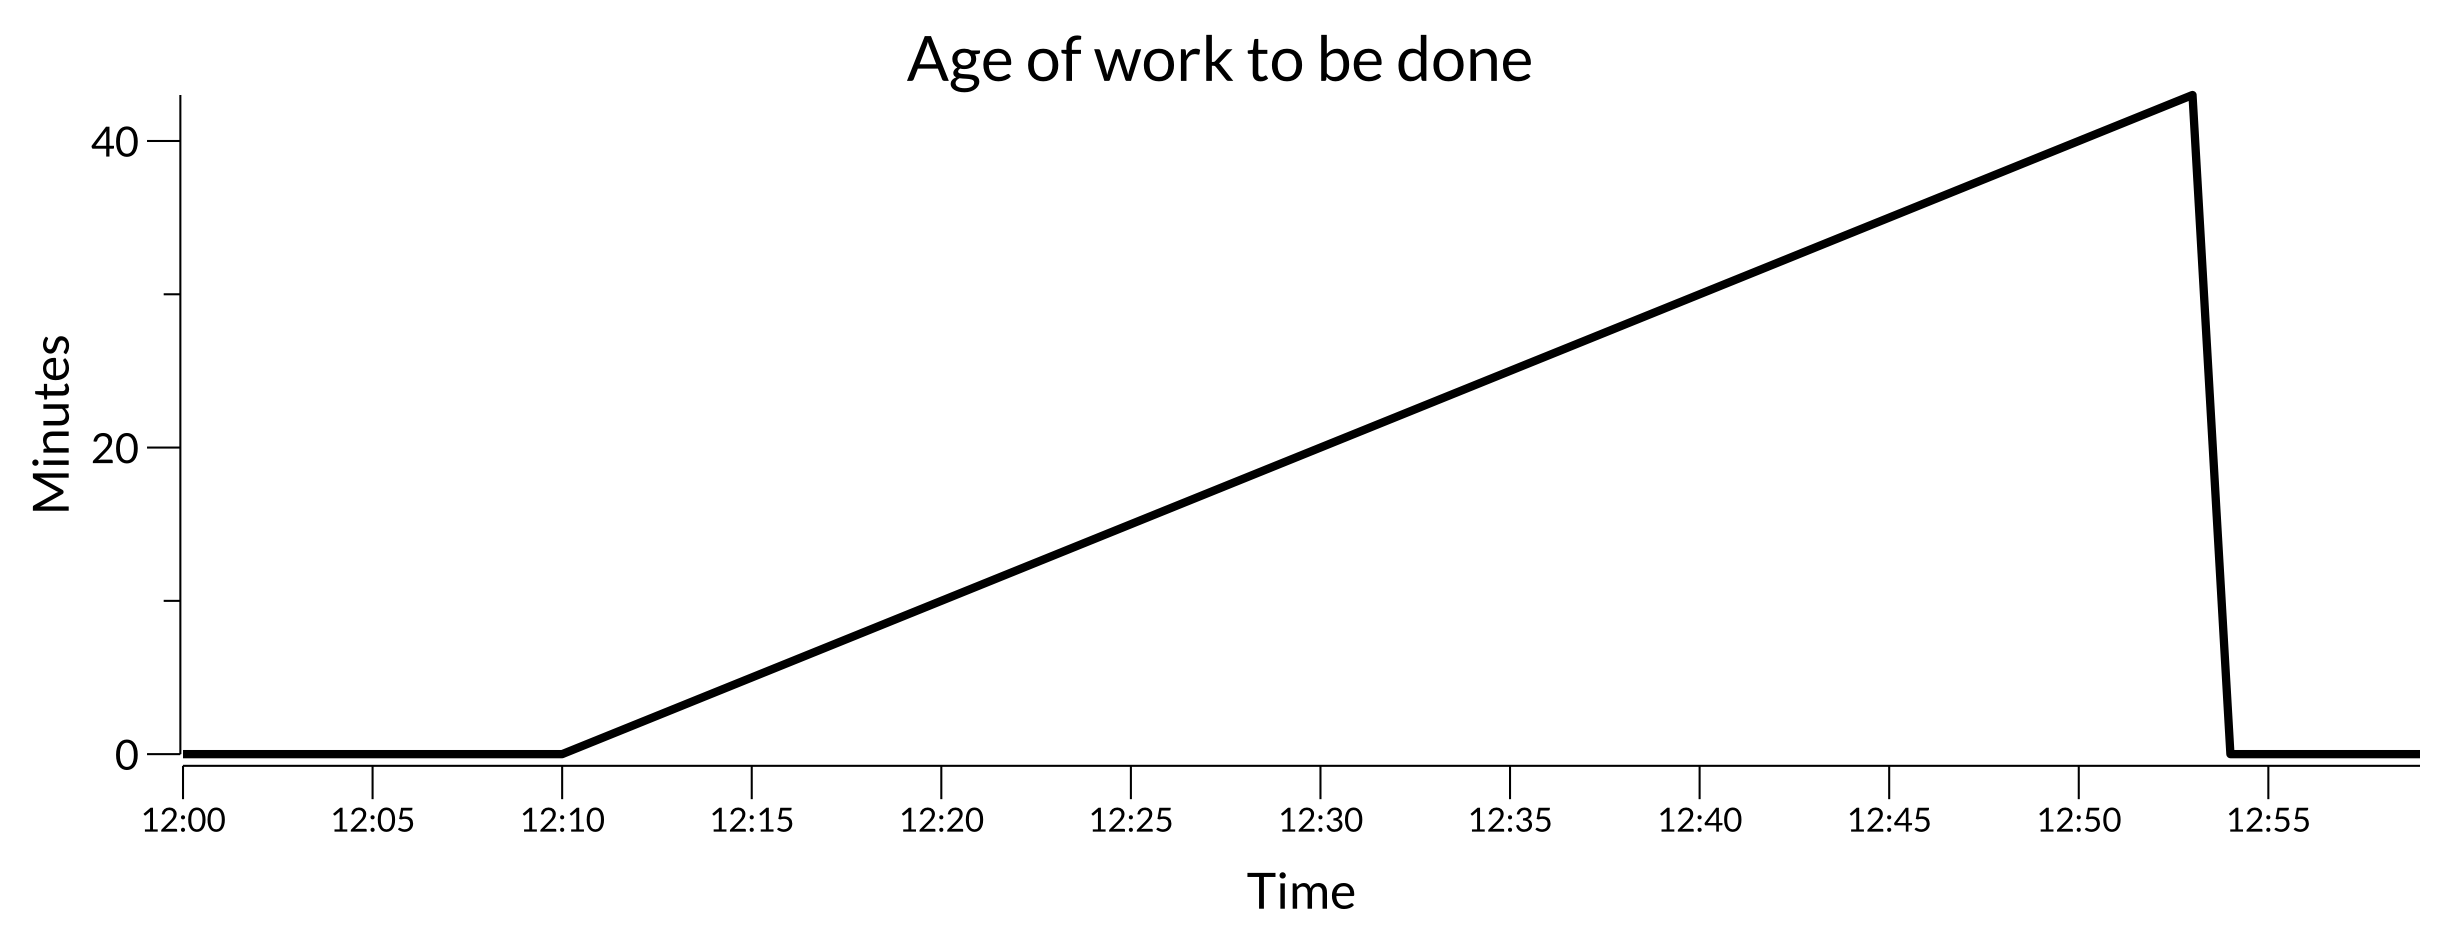 A sample time series line plot of age of work to be done similar to the previous but at 12:10 work appears and continues to age until almost 12:55 until finishing, returning the line to 0.